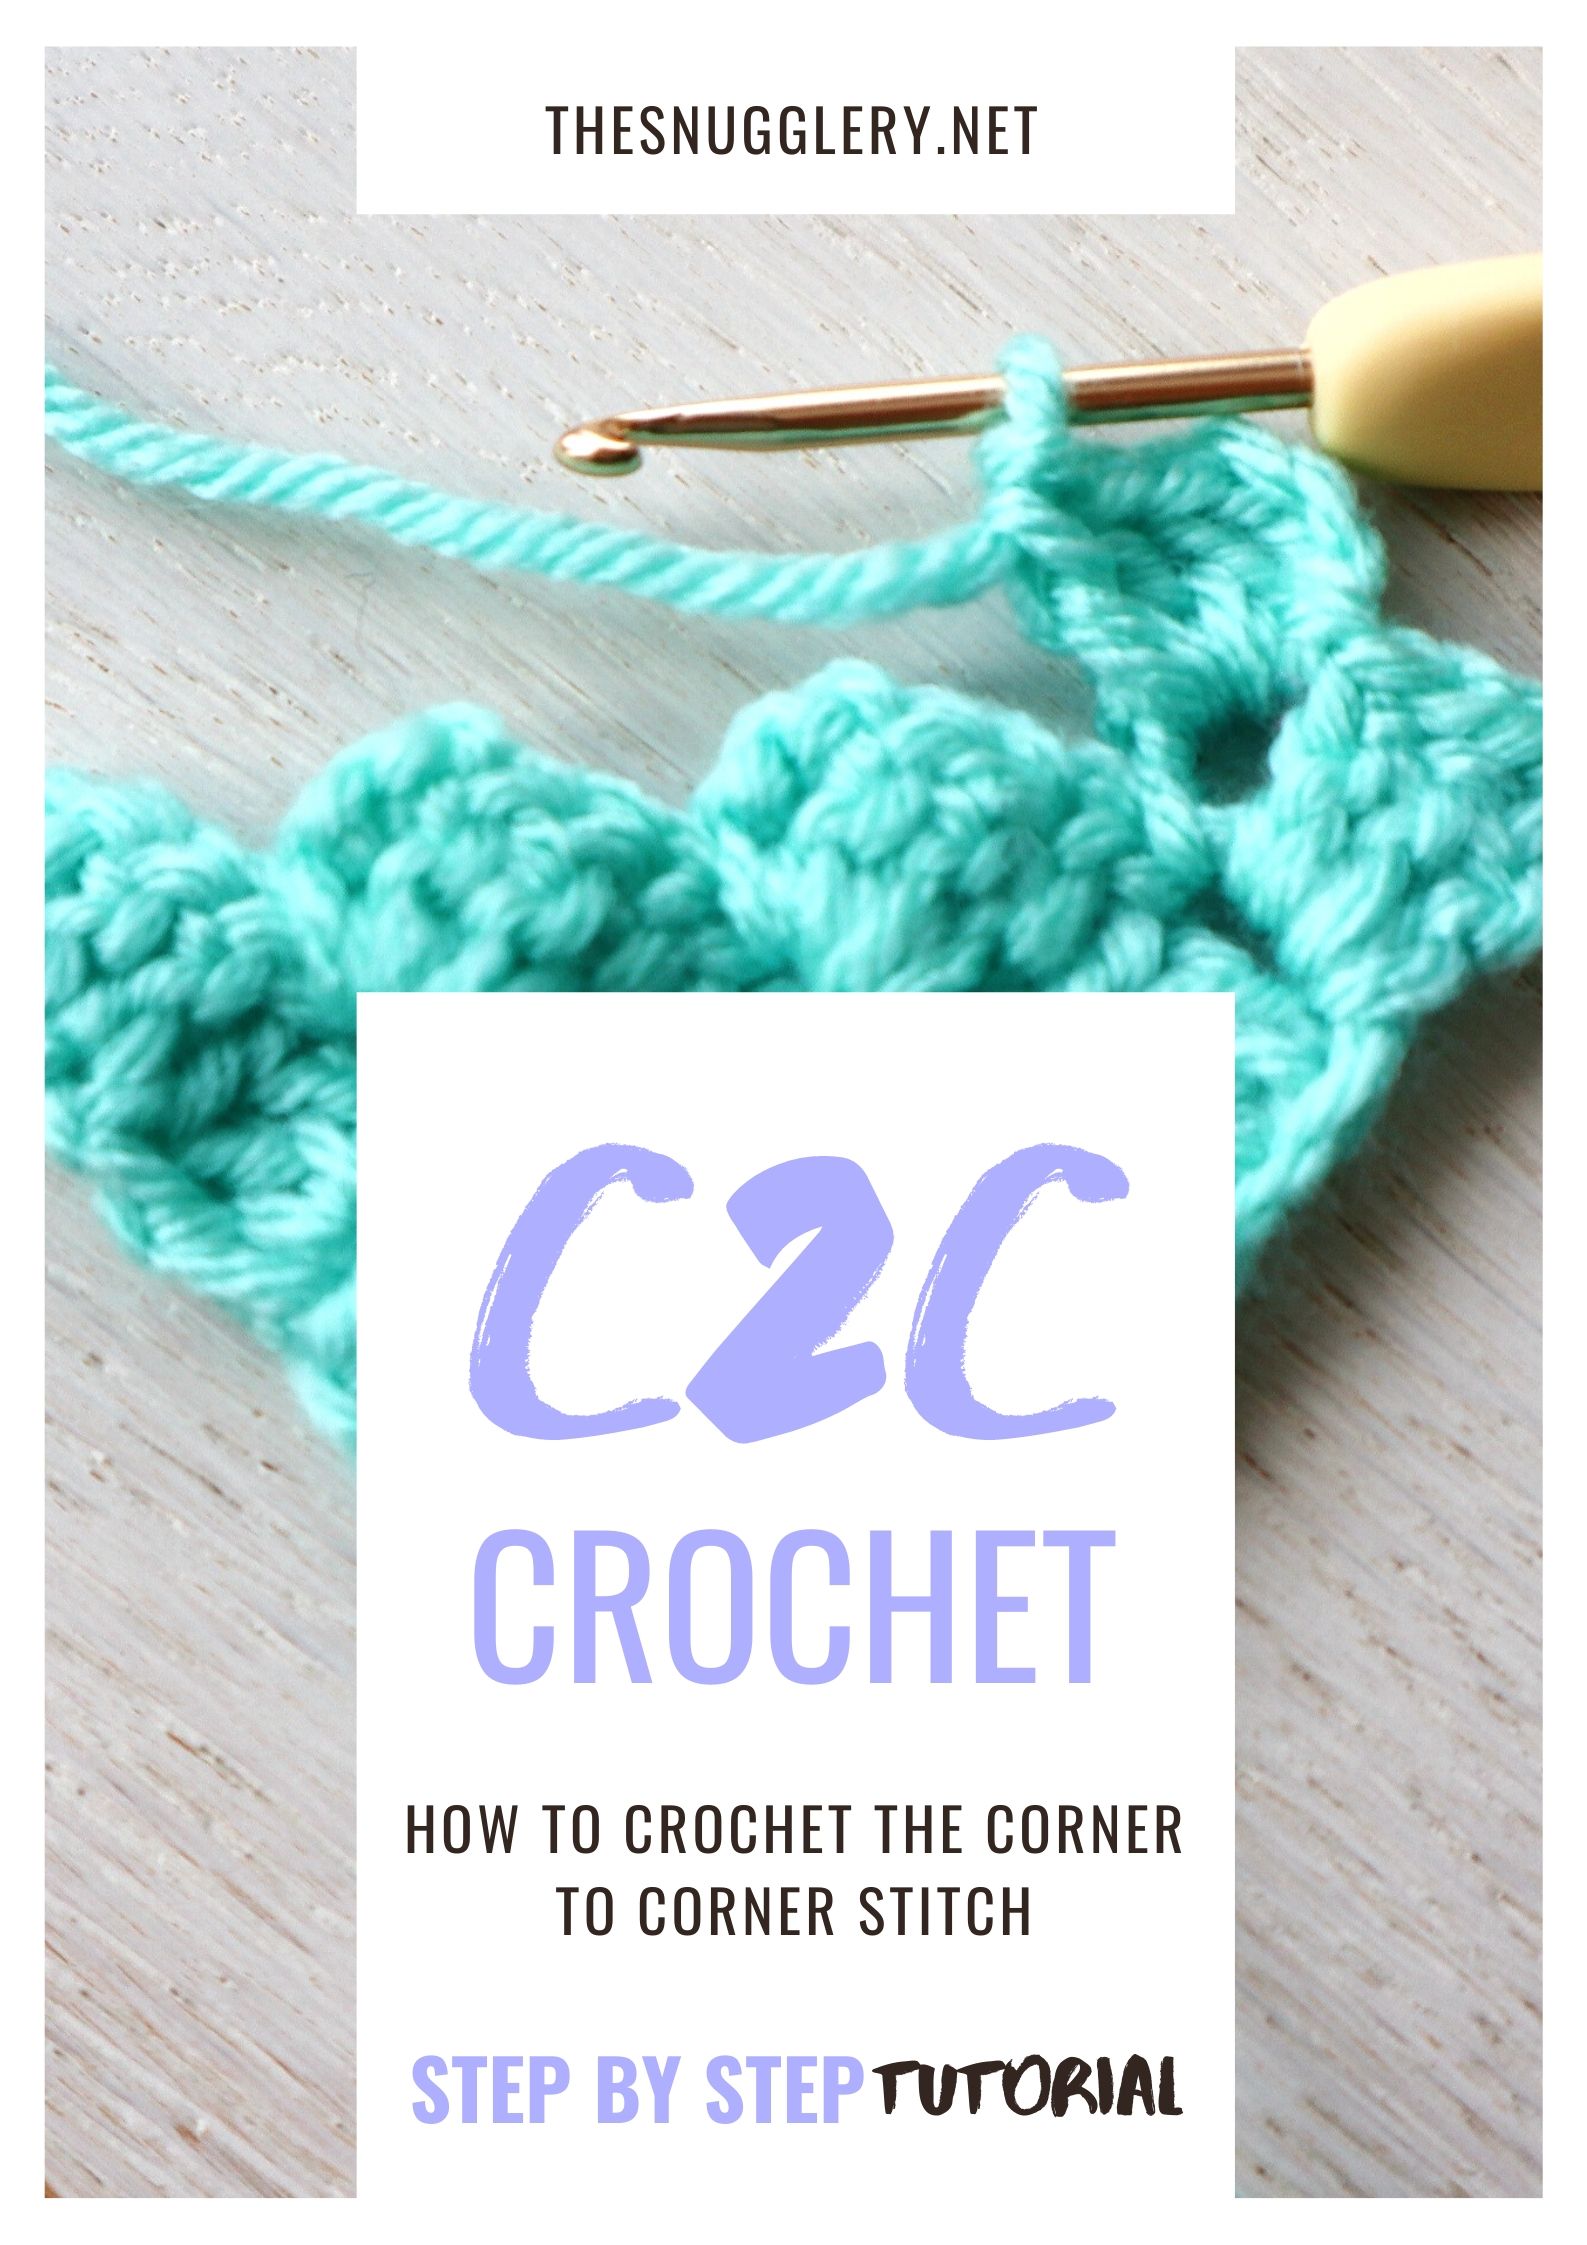 How To Crochet The Corner To Corner Stitch – For C2c Graphgans